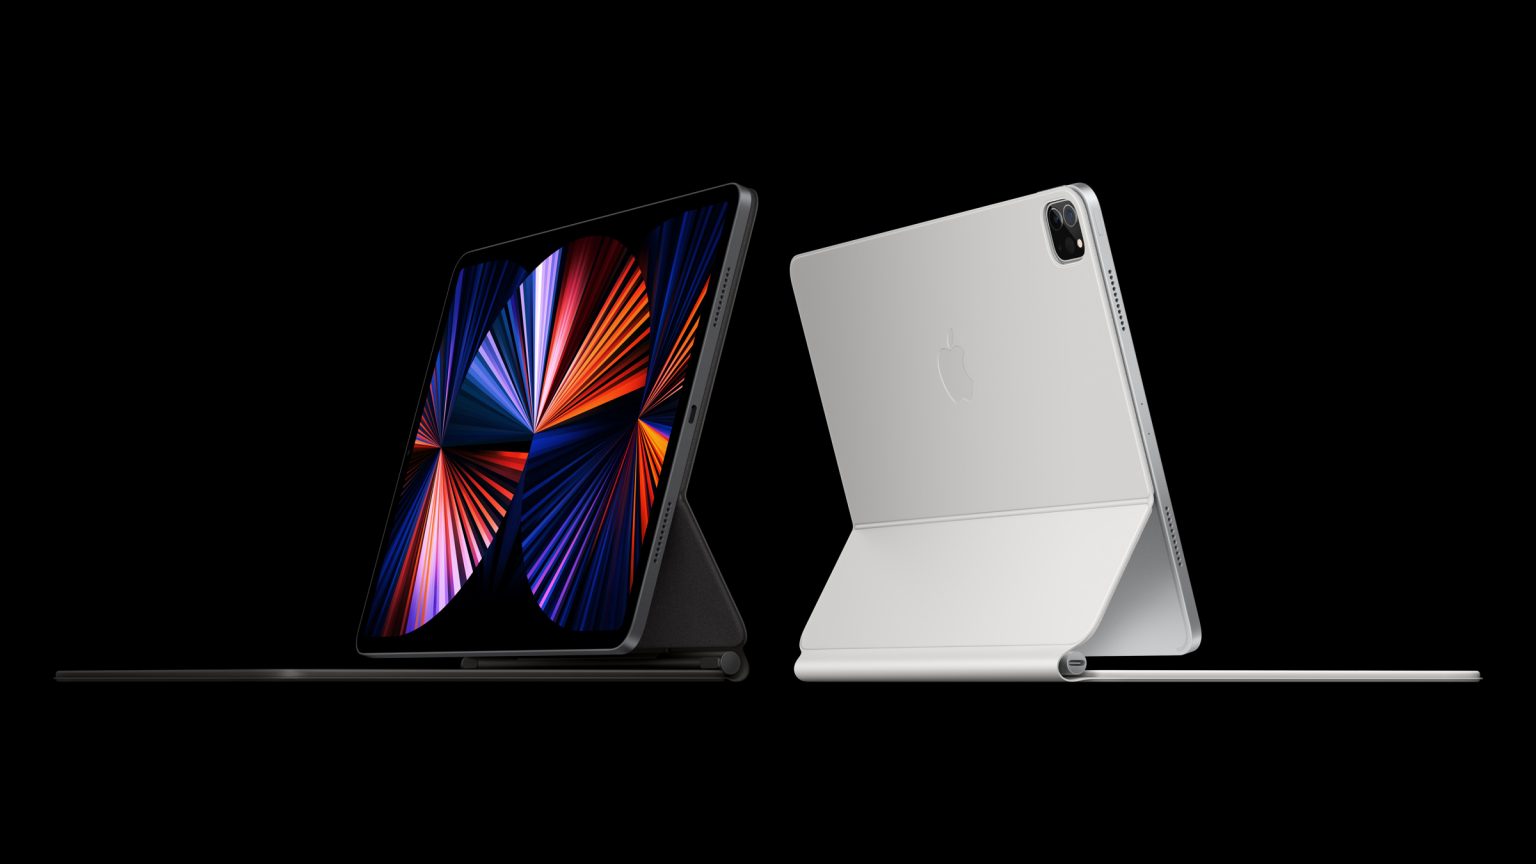 How to preorder a 2021 iPad Pro